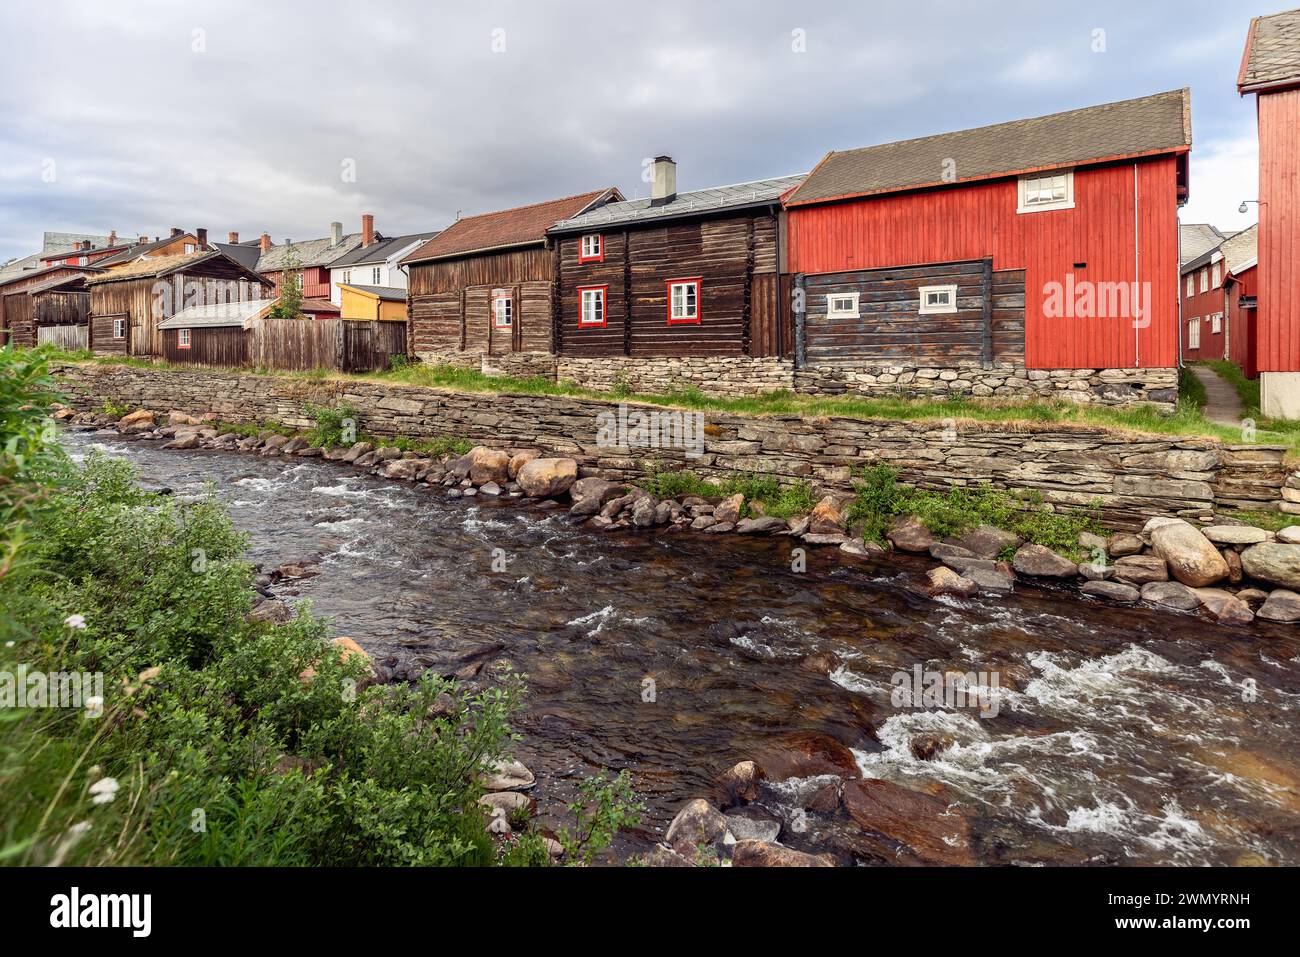 The heritage-rich landscape of Roros unfolds along the Glomma River, featuring traditional timber homes with red accents Stock Photo